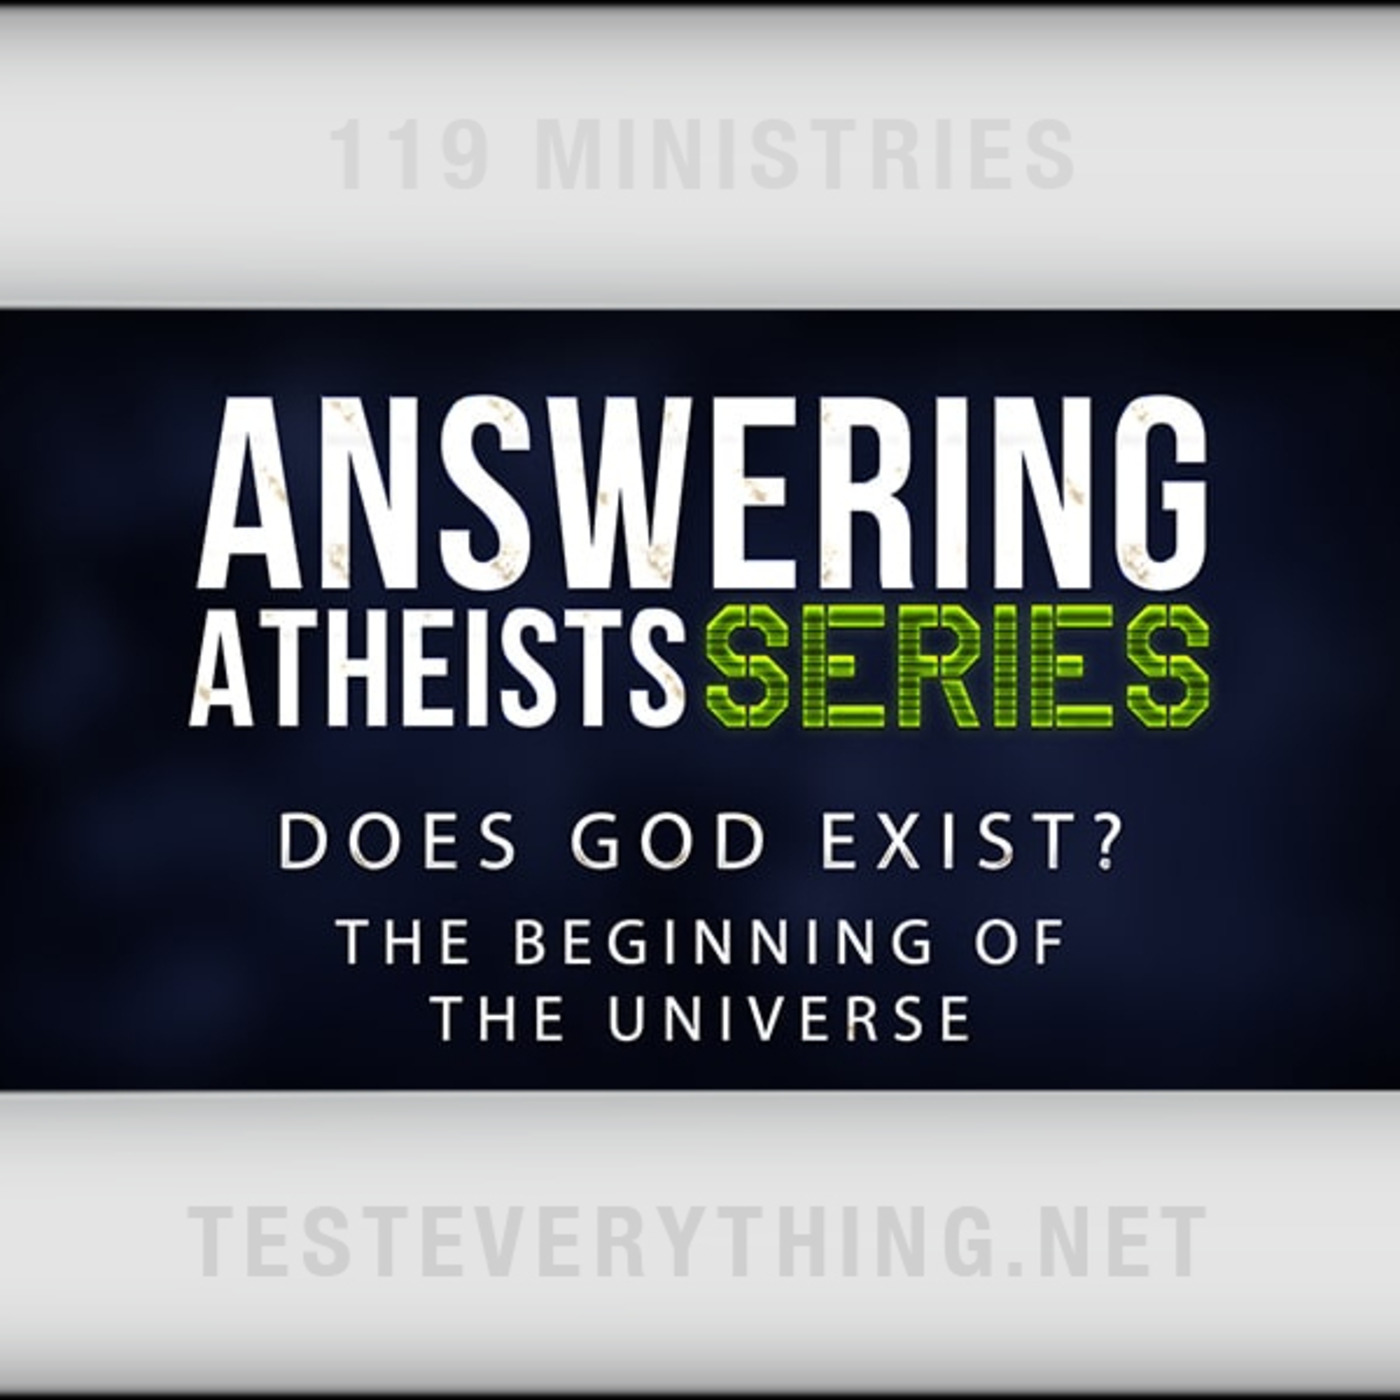 Answering Atheists: Does God Exist? - The Beginning of the Universe